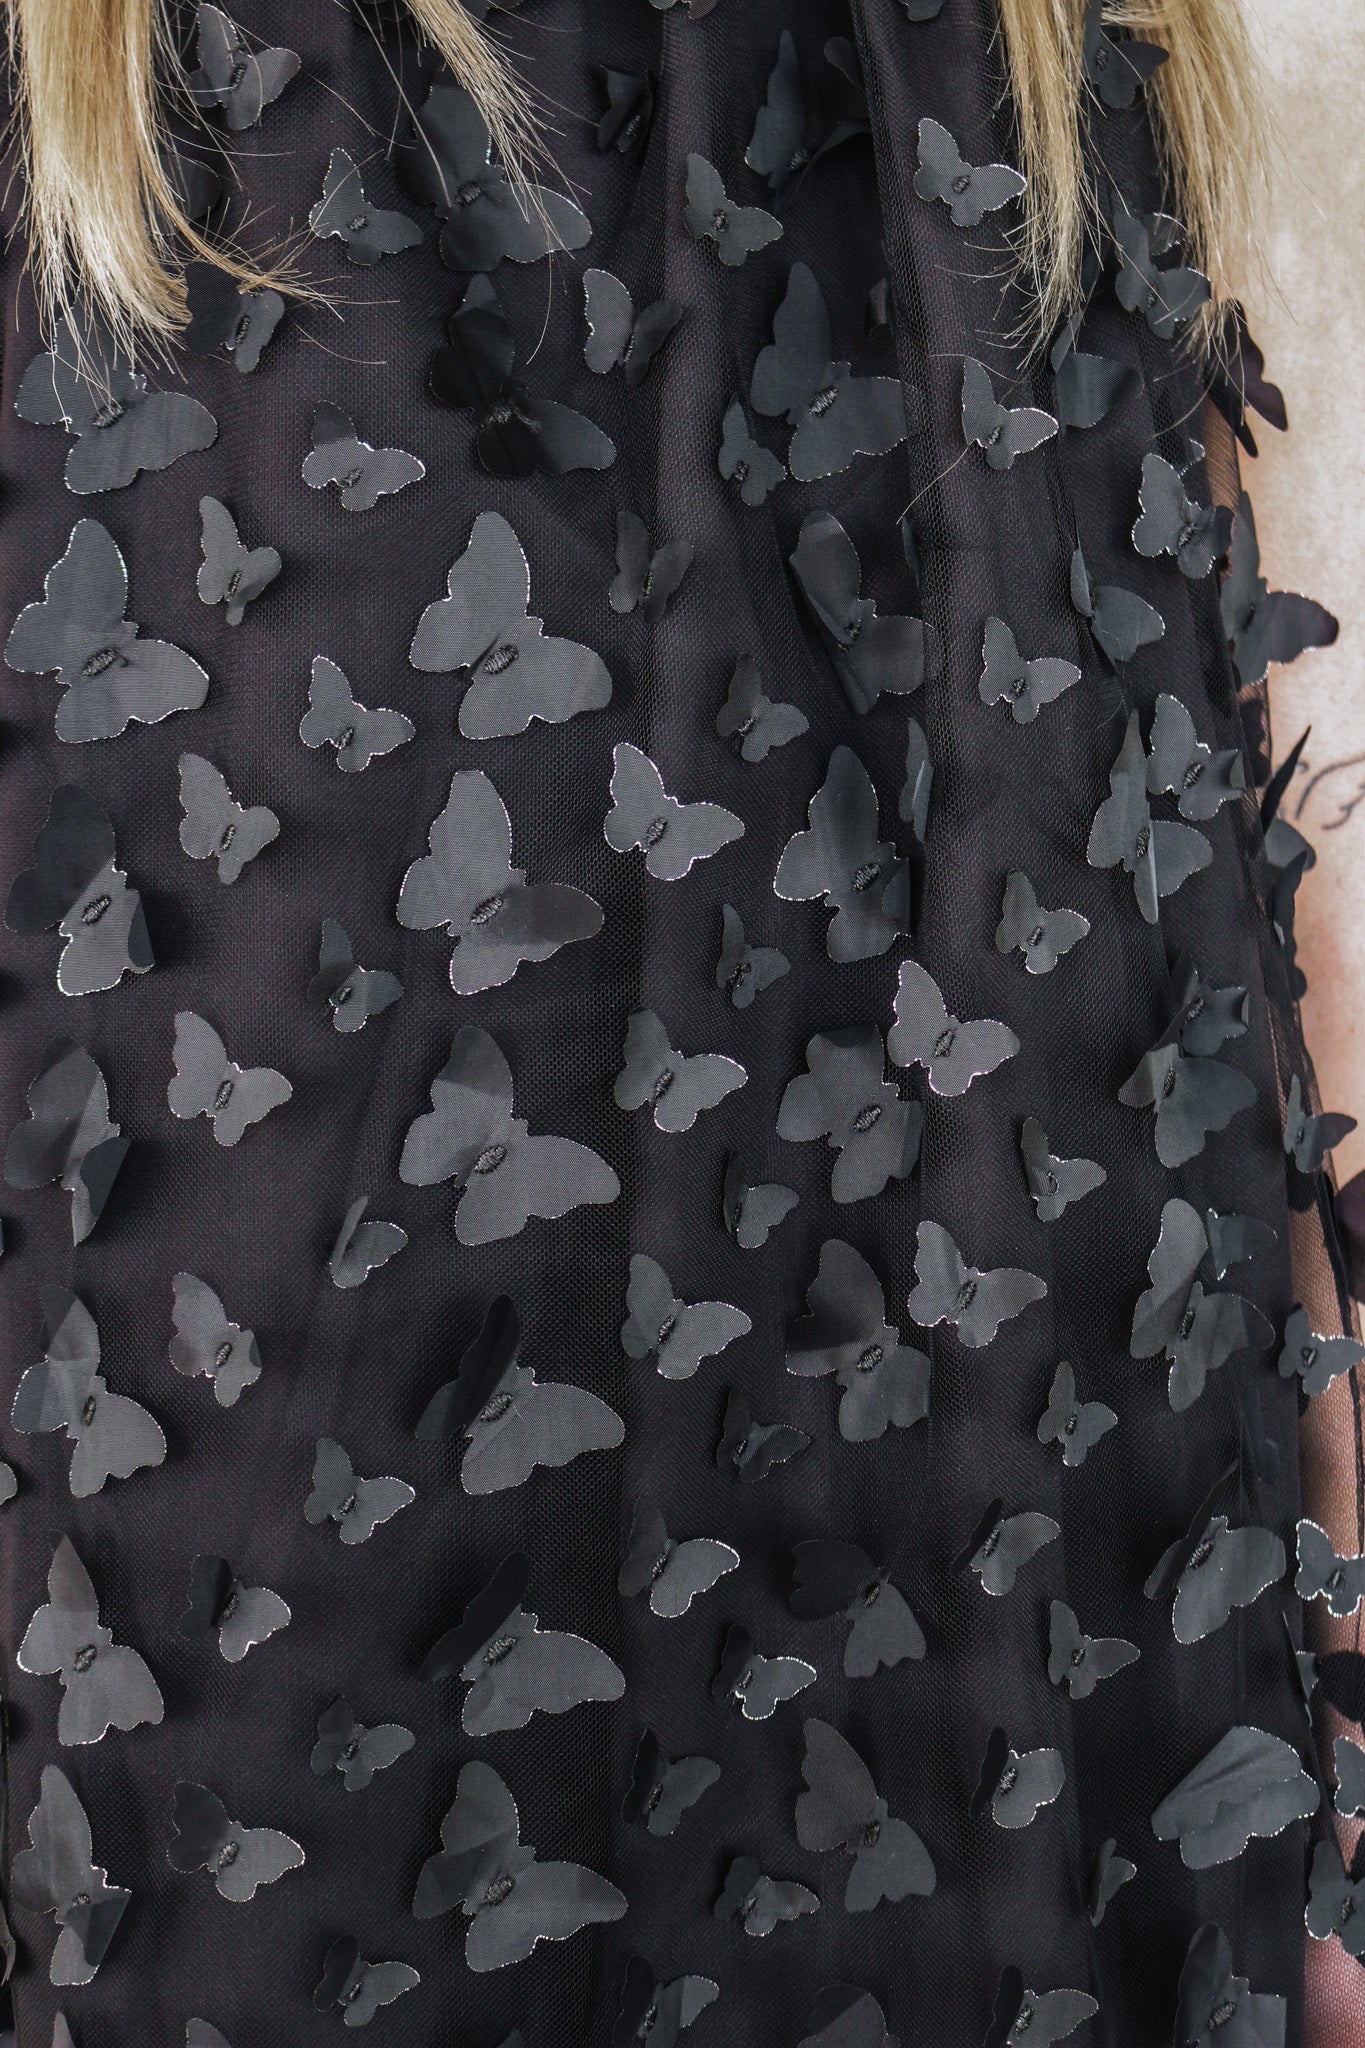 Find Your Wings Black Butterfly Dress